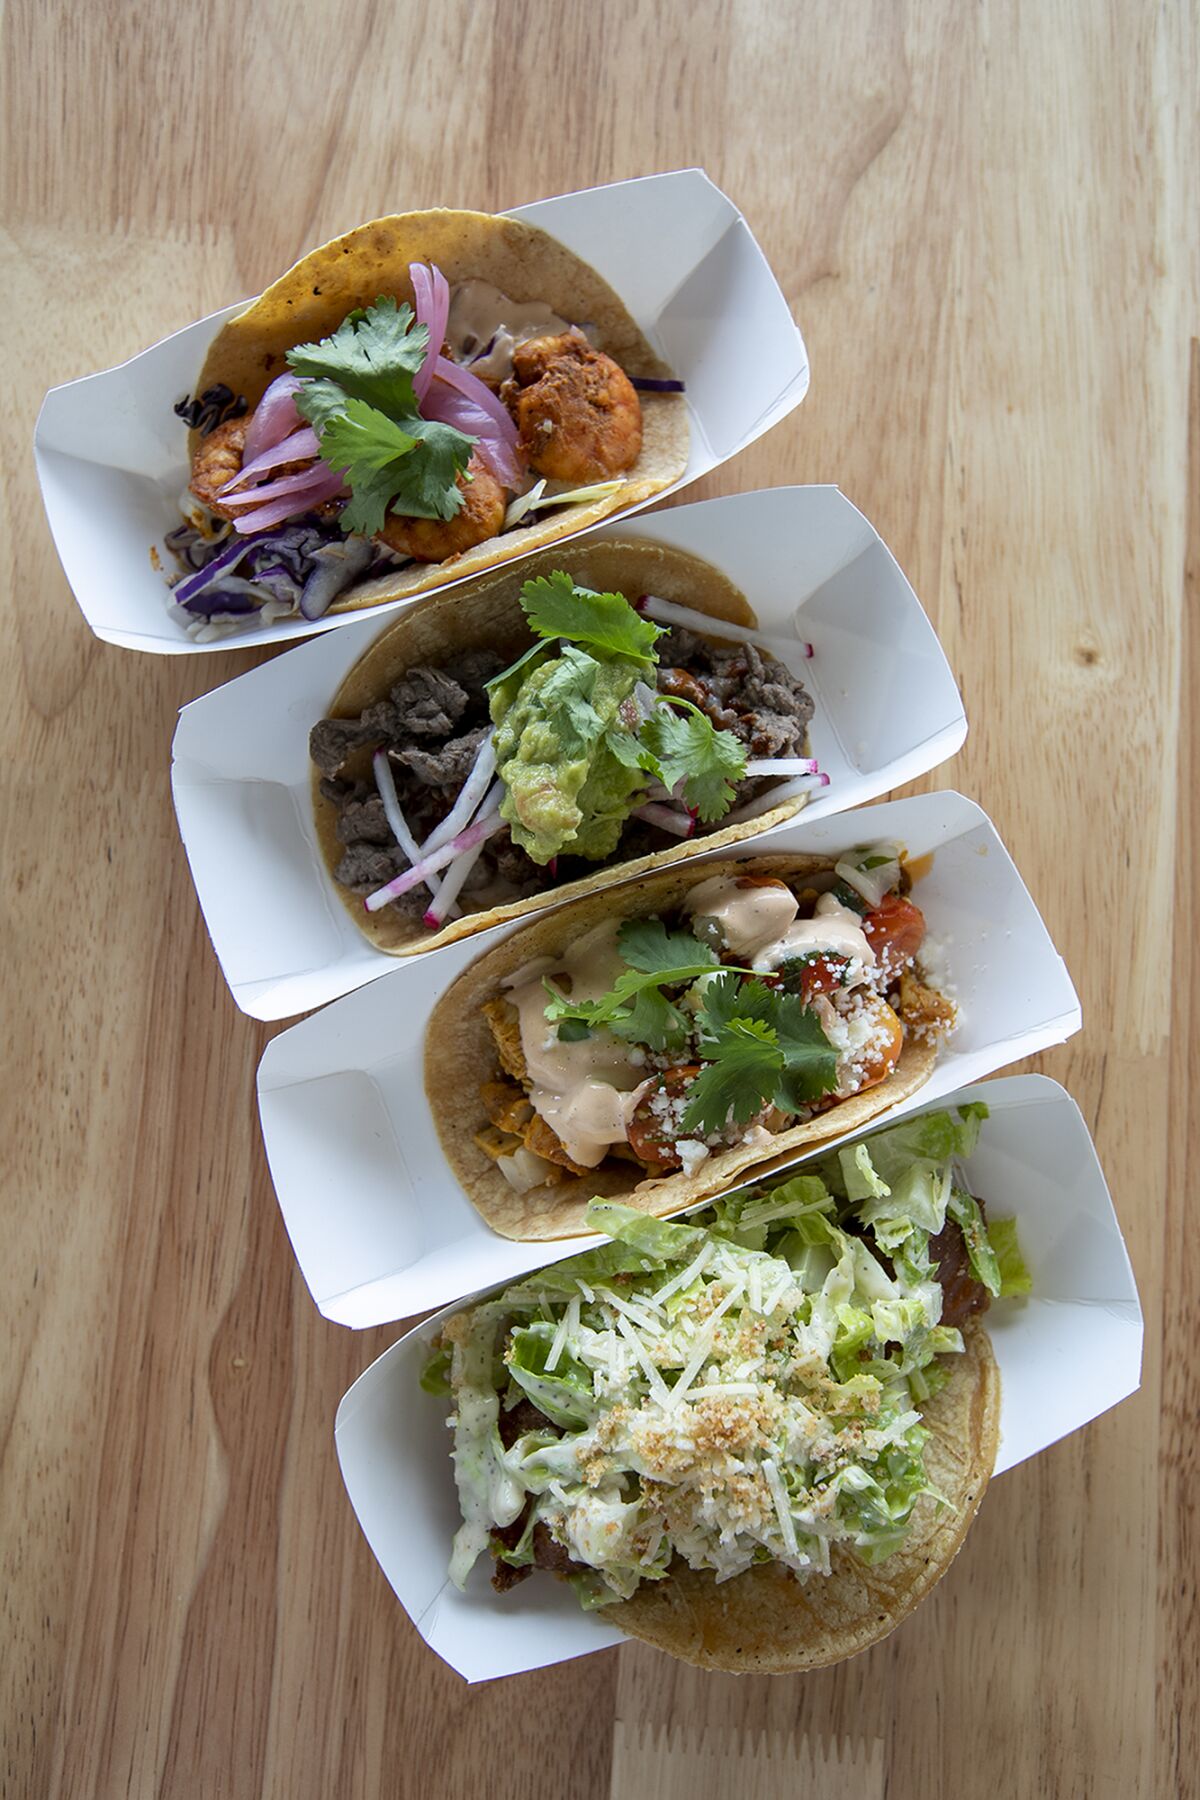 A taco platter from Chica's Tacos at Local Kitchens in Huntington Beach.